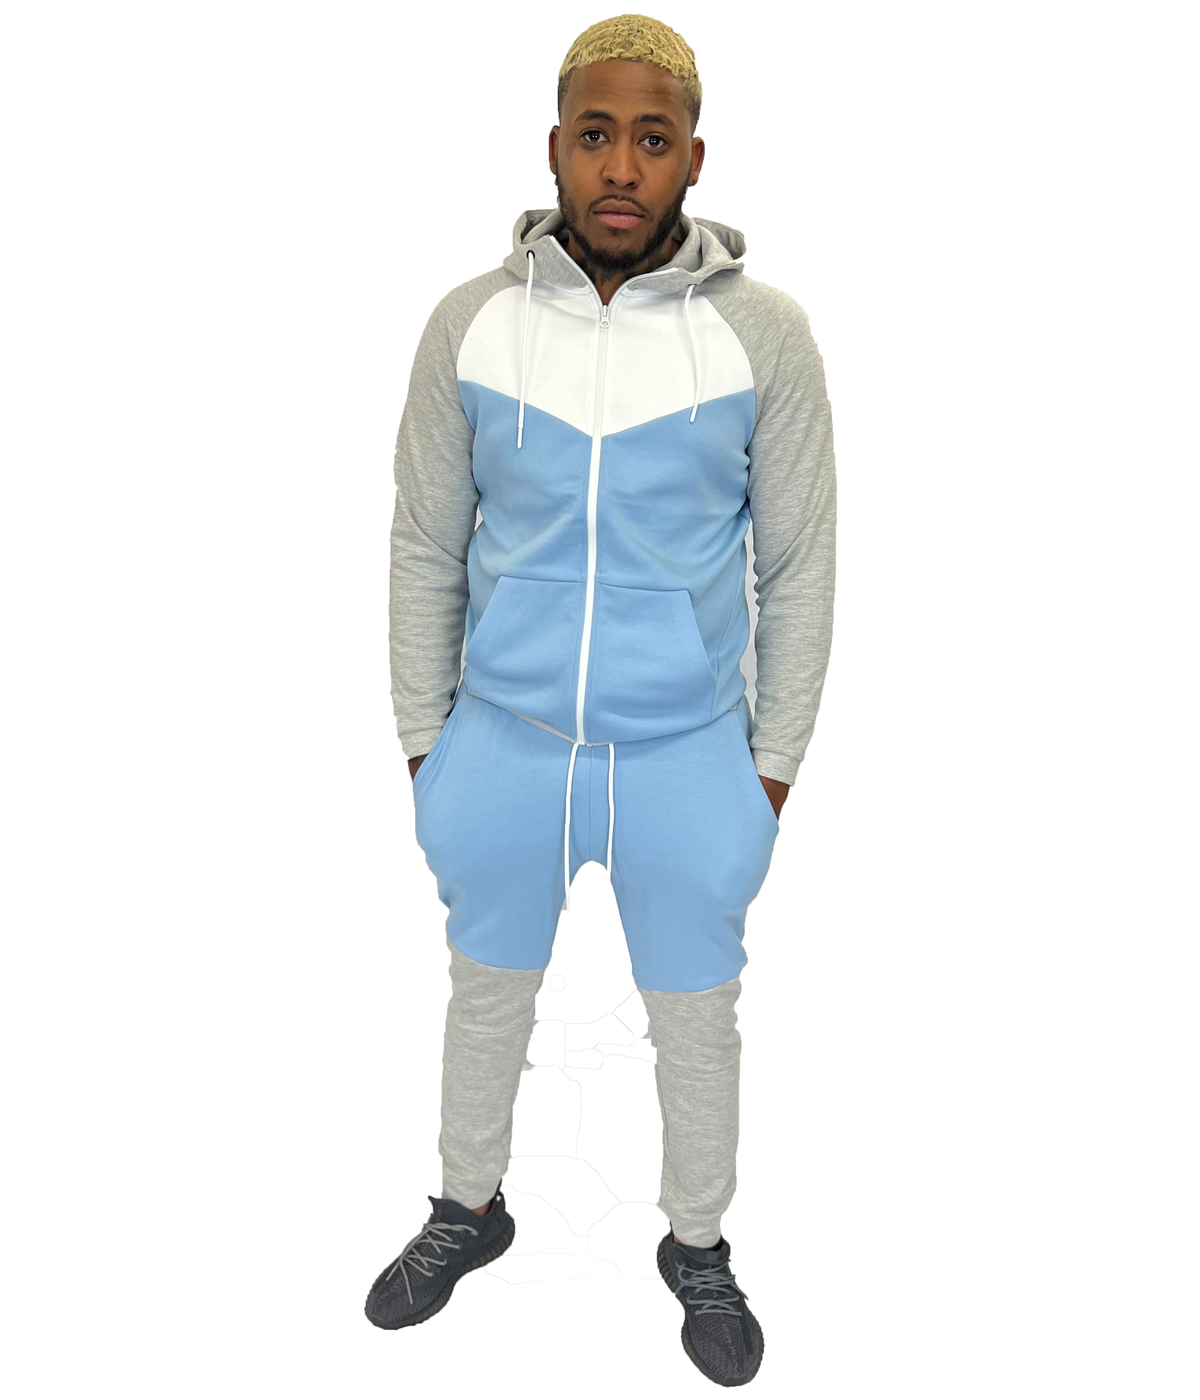 Tech Suits 3 Tone - Skyblue/Grey/White